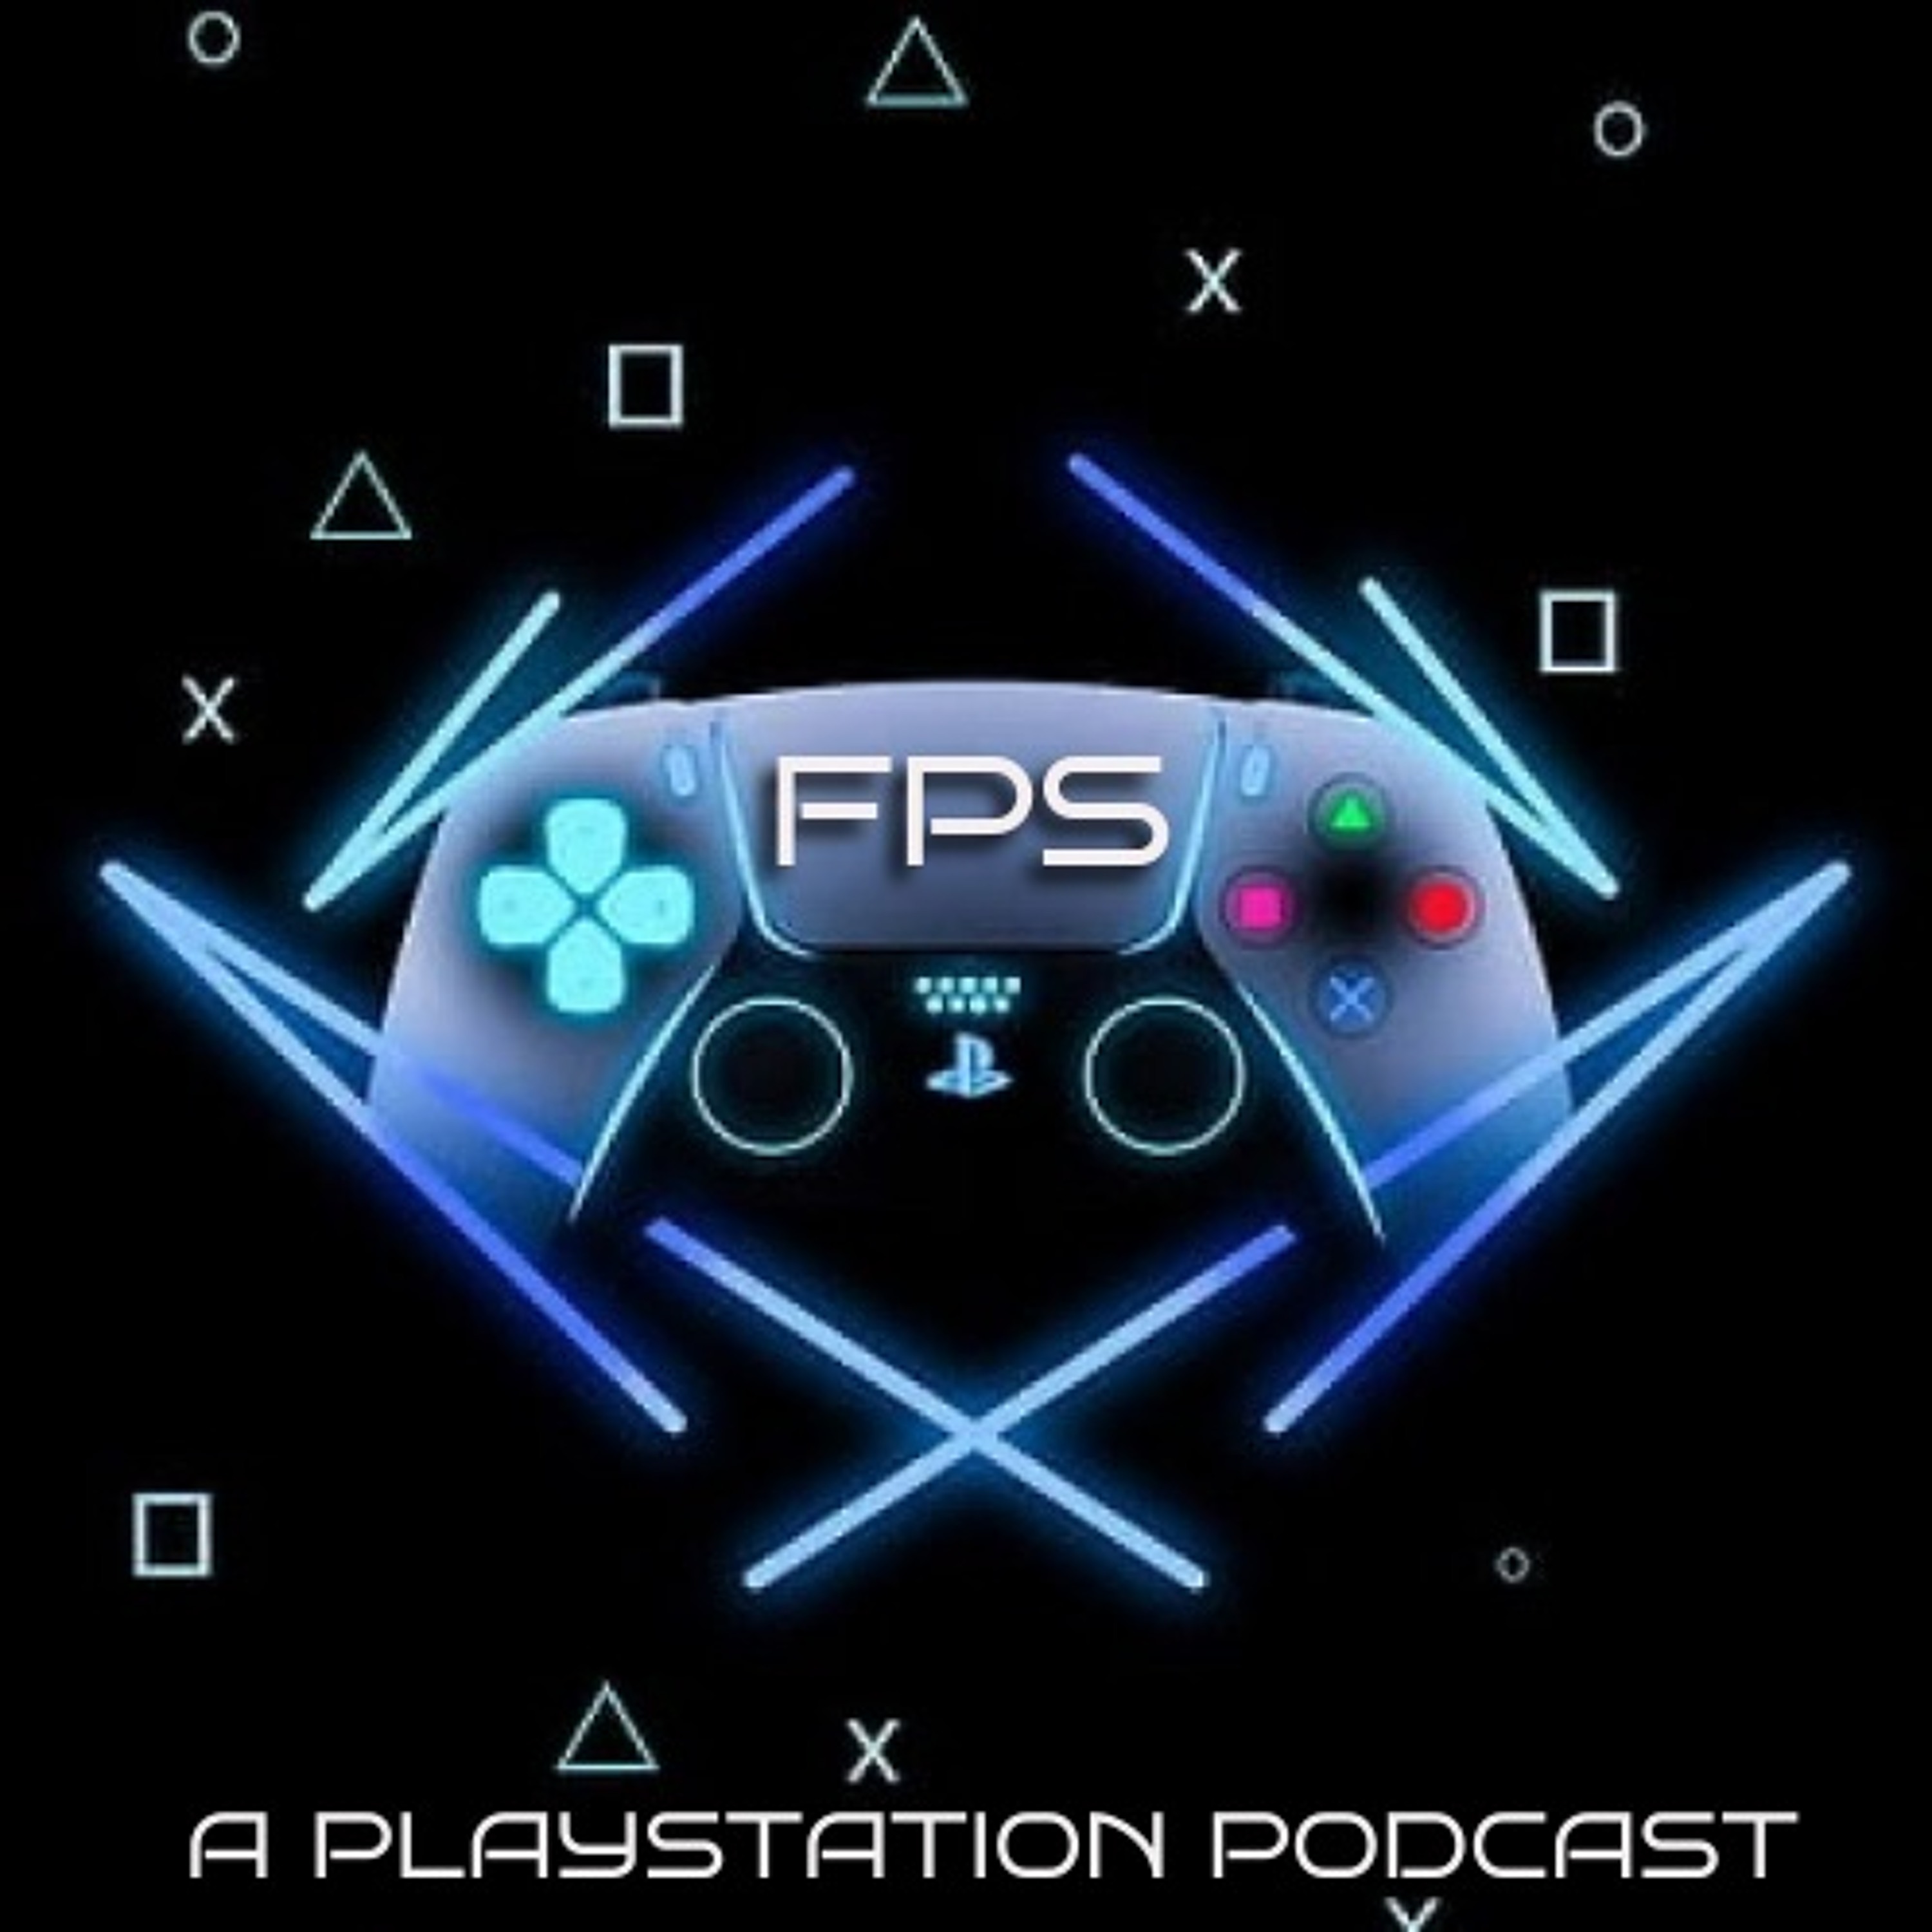 Welcome to the FPS Podcast